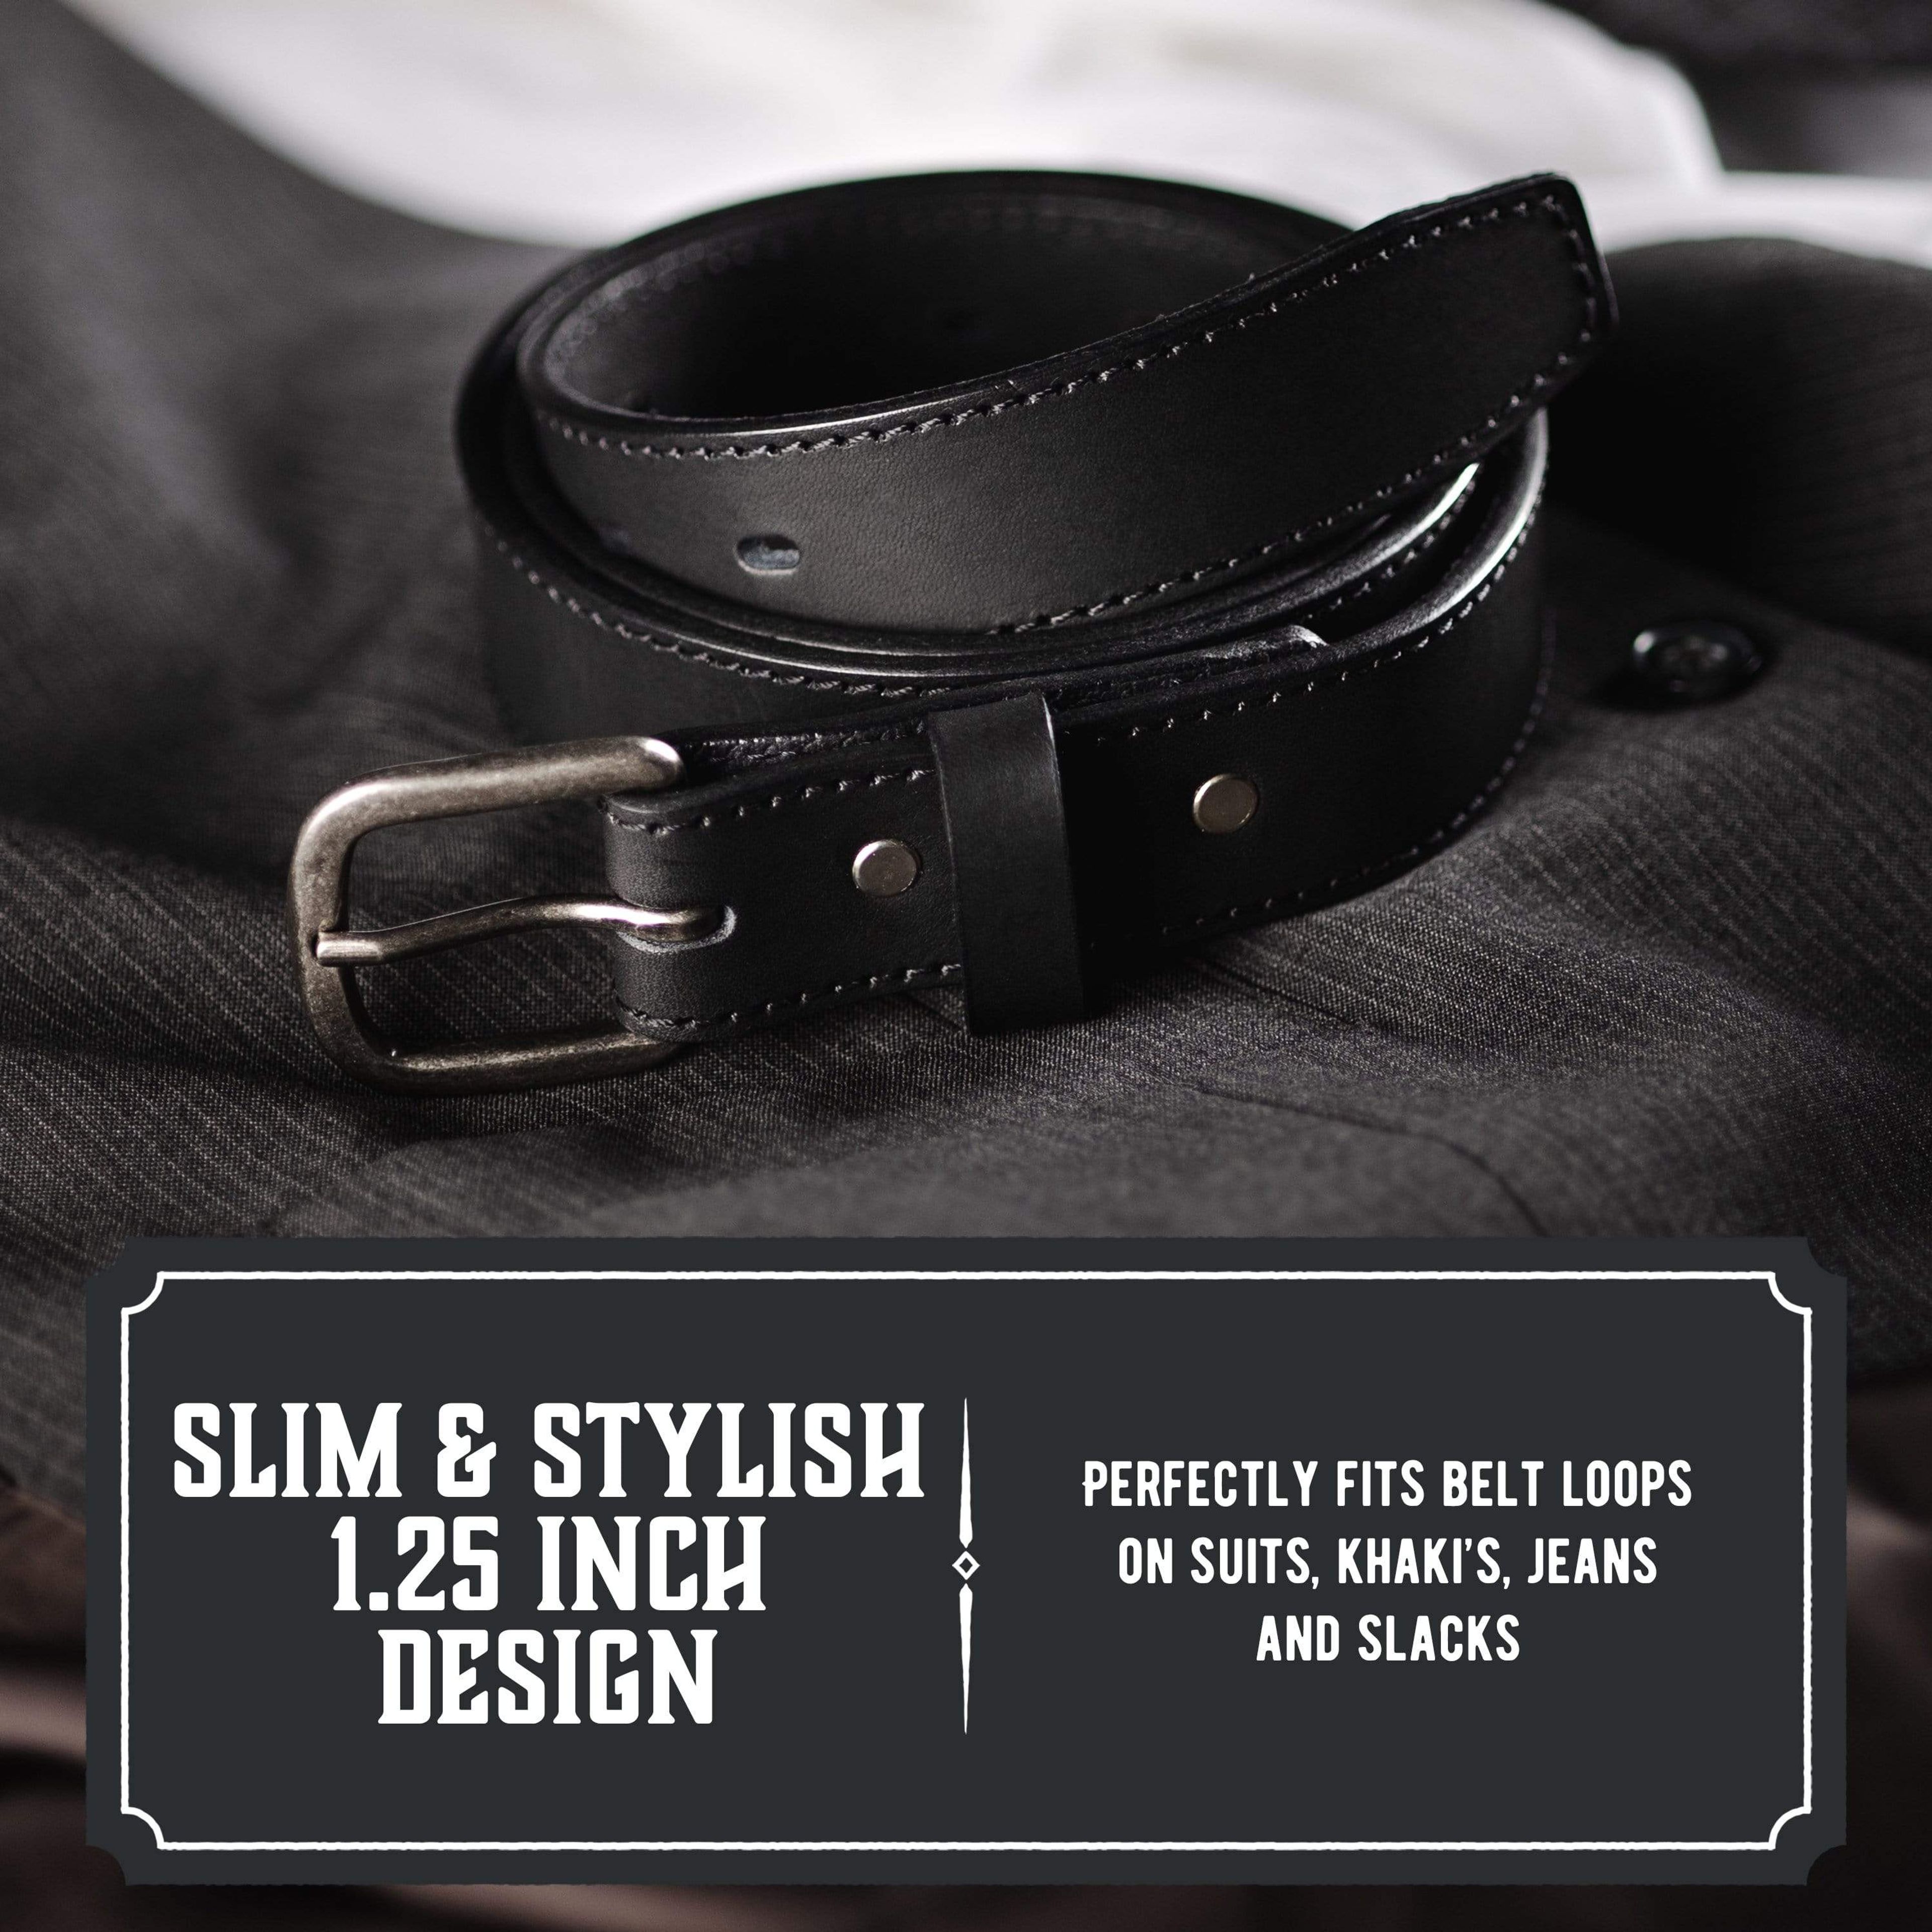 The Executive Leather 1 1/4 Inch Dress Belt